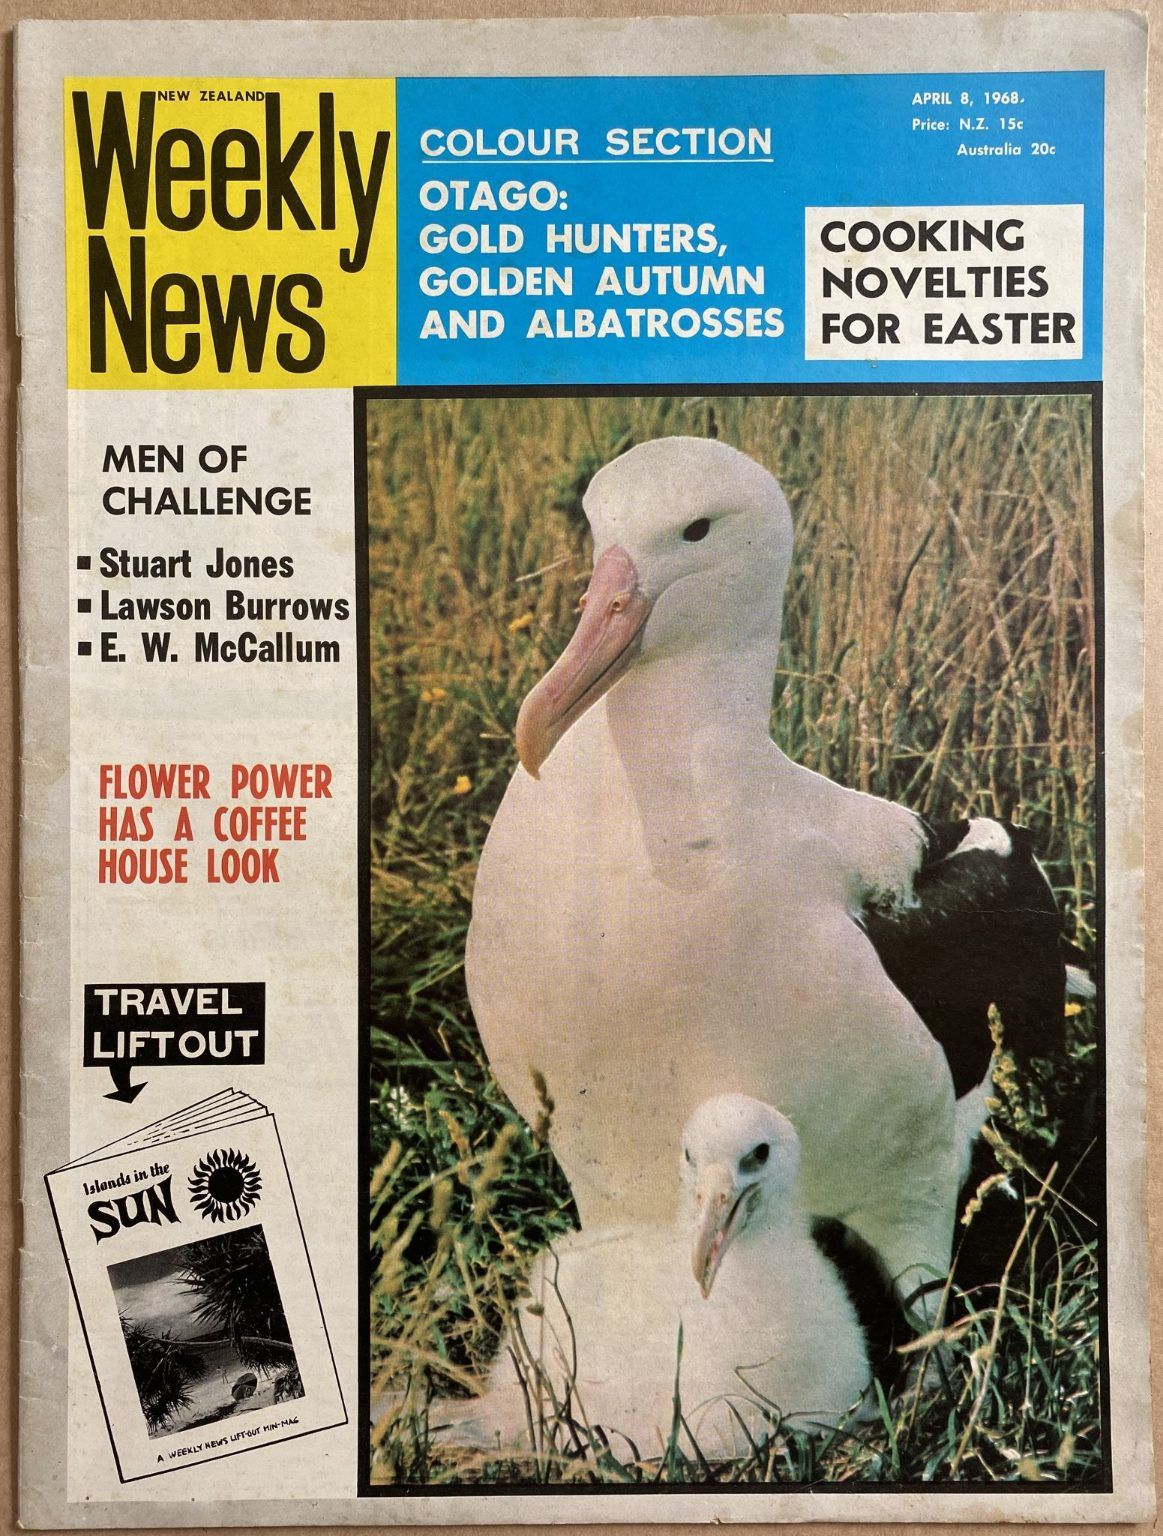 OLD NEWSPAPER: New Zealand Weekly News, No. 5445, 8 April 1968